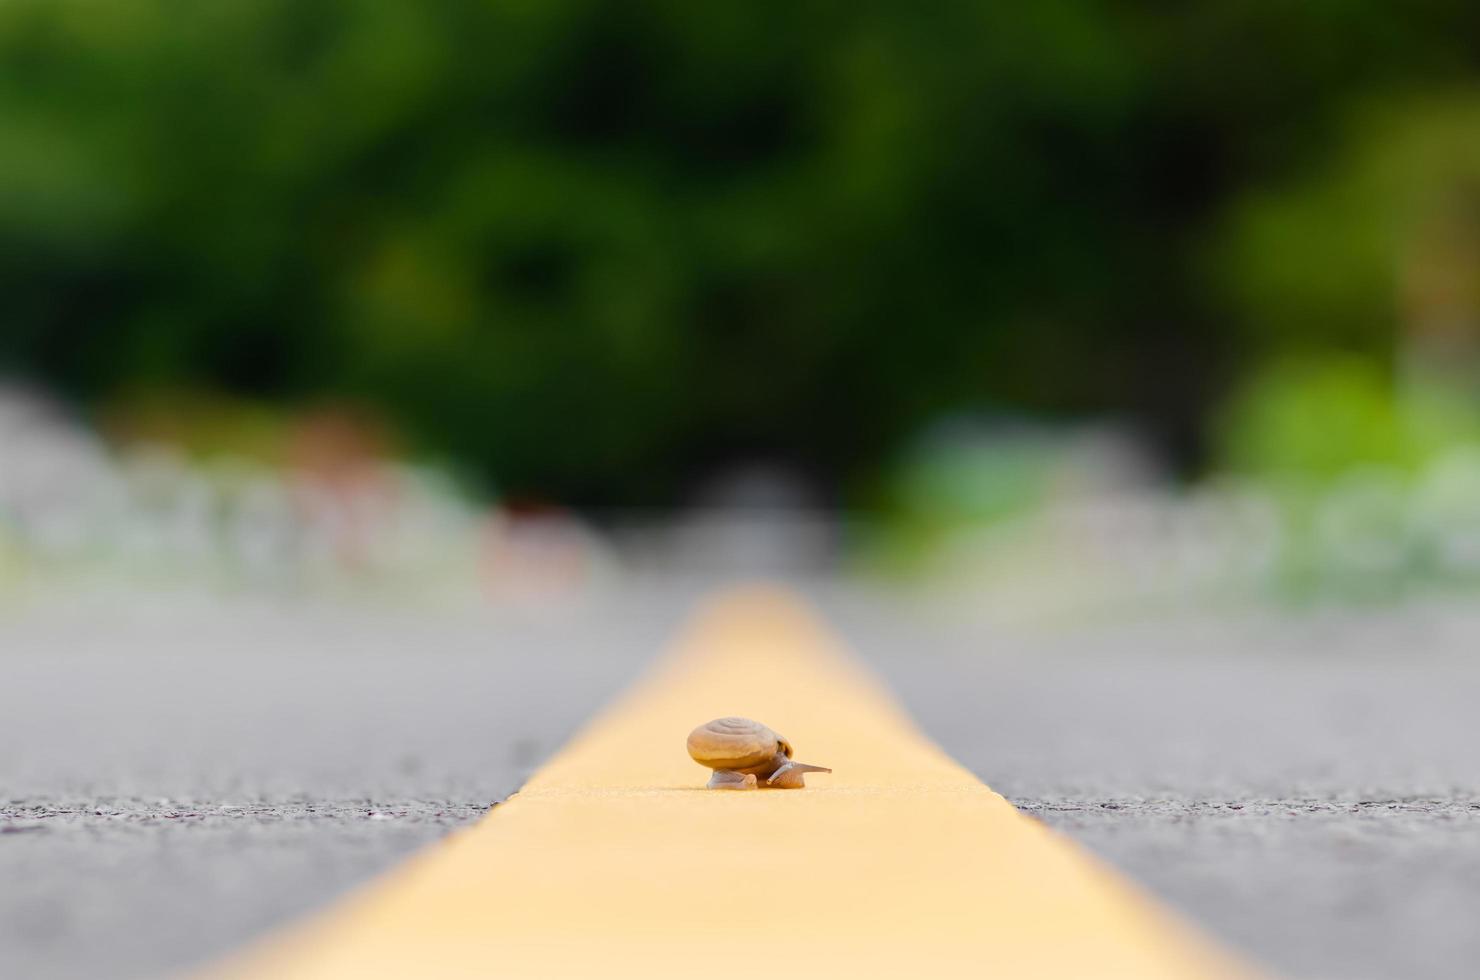 A snail crossing on the middle way of road alone. Road traffic safety concept. photo